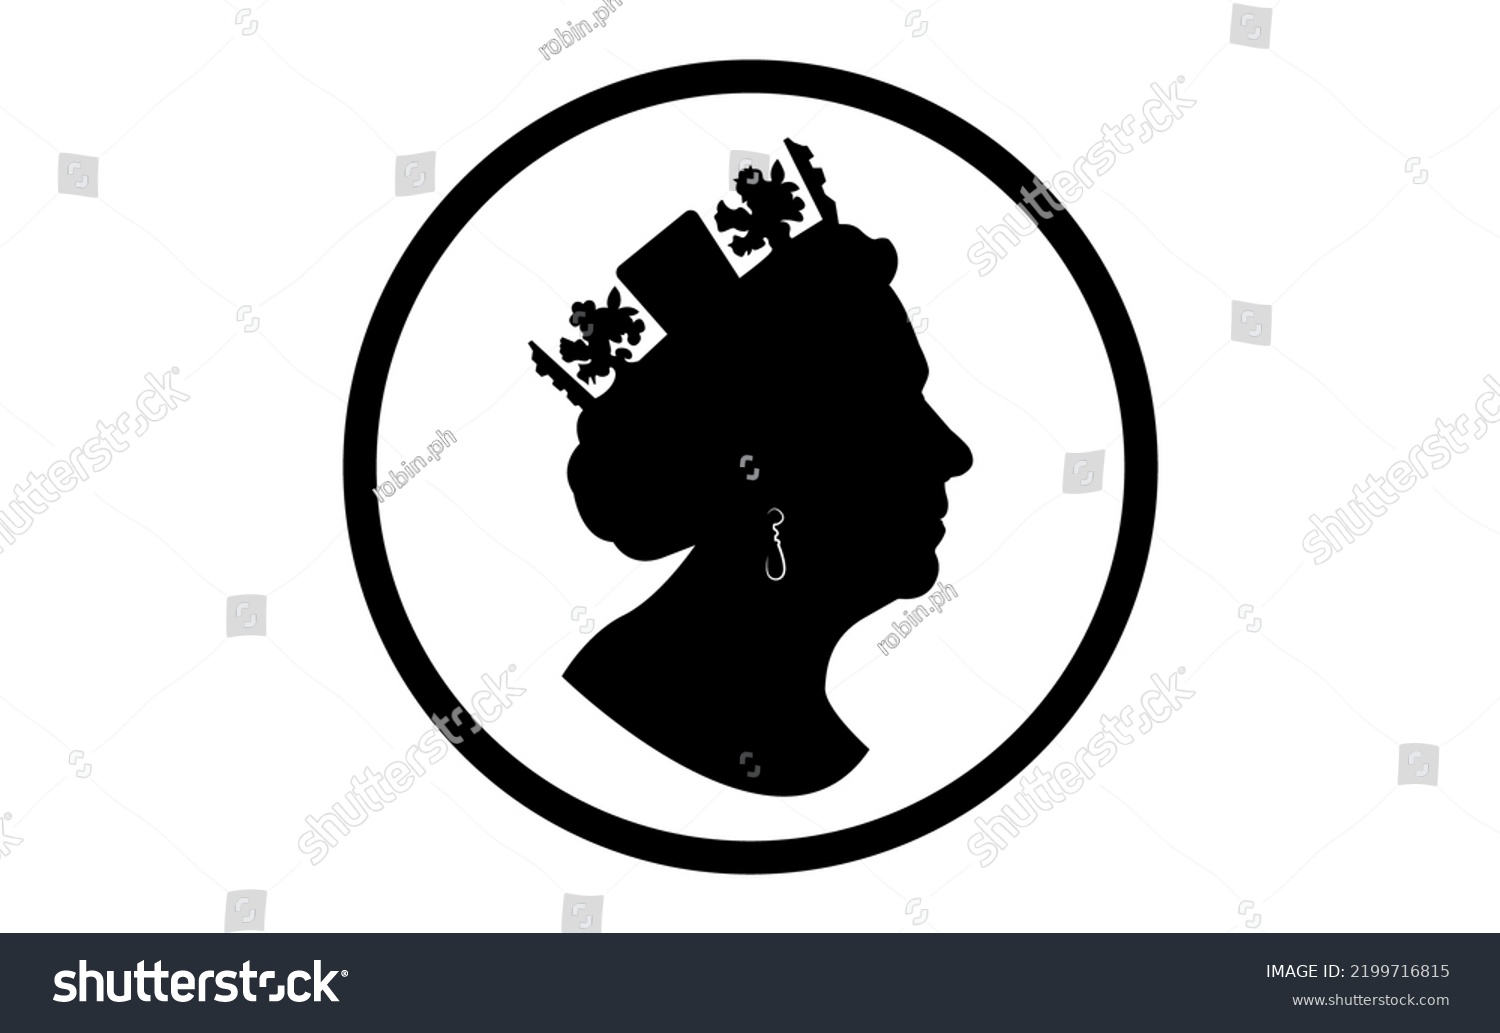 SVG of side profile of Queen Elizabeth II. The Queen's silhouette portrait, round icon vector illustration isolated on white background  svg